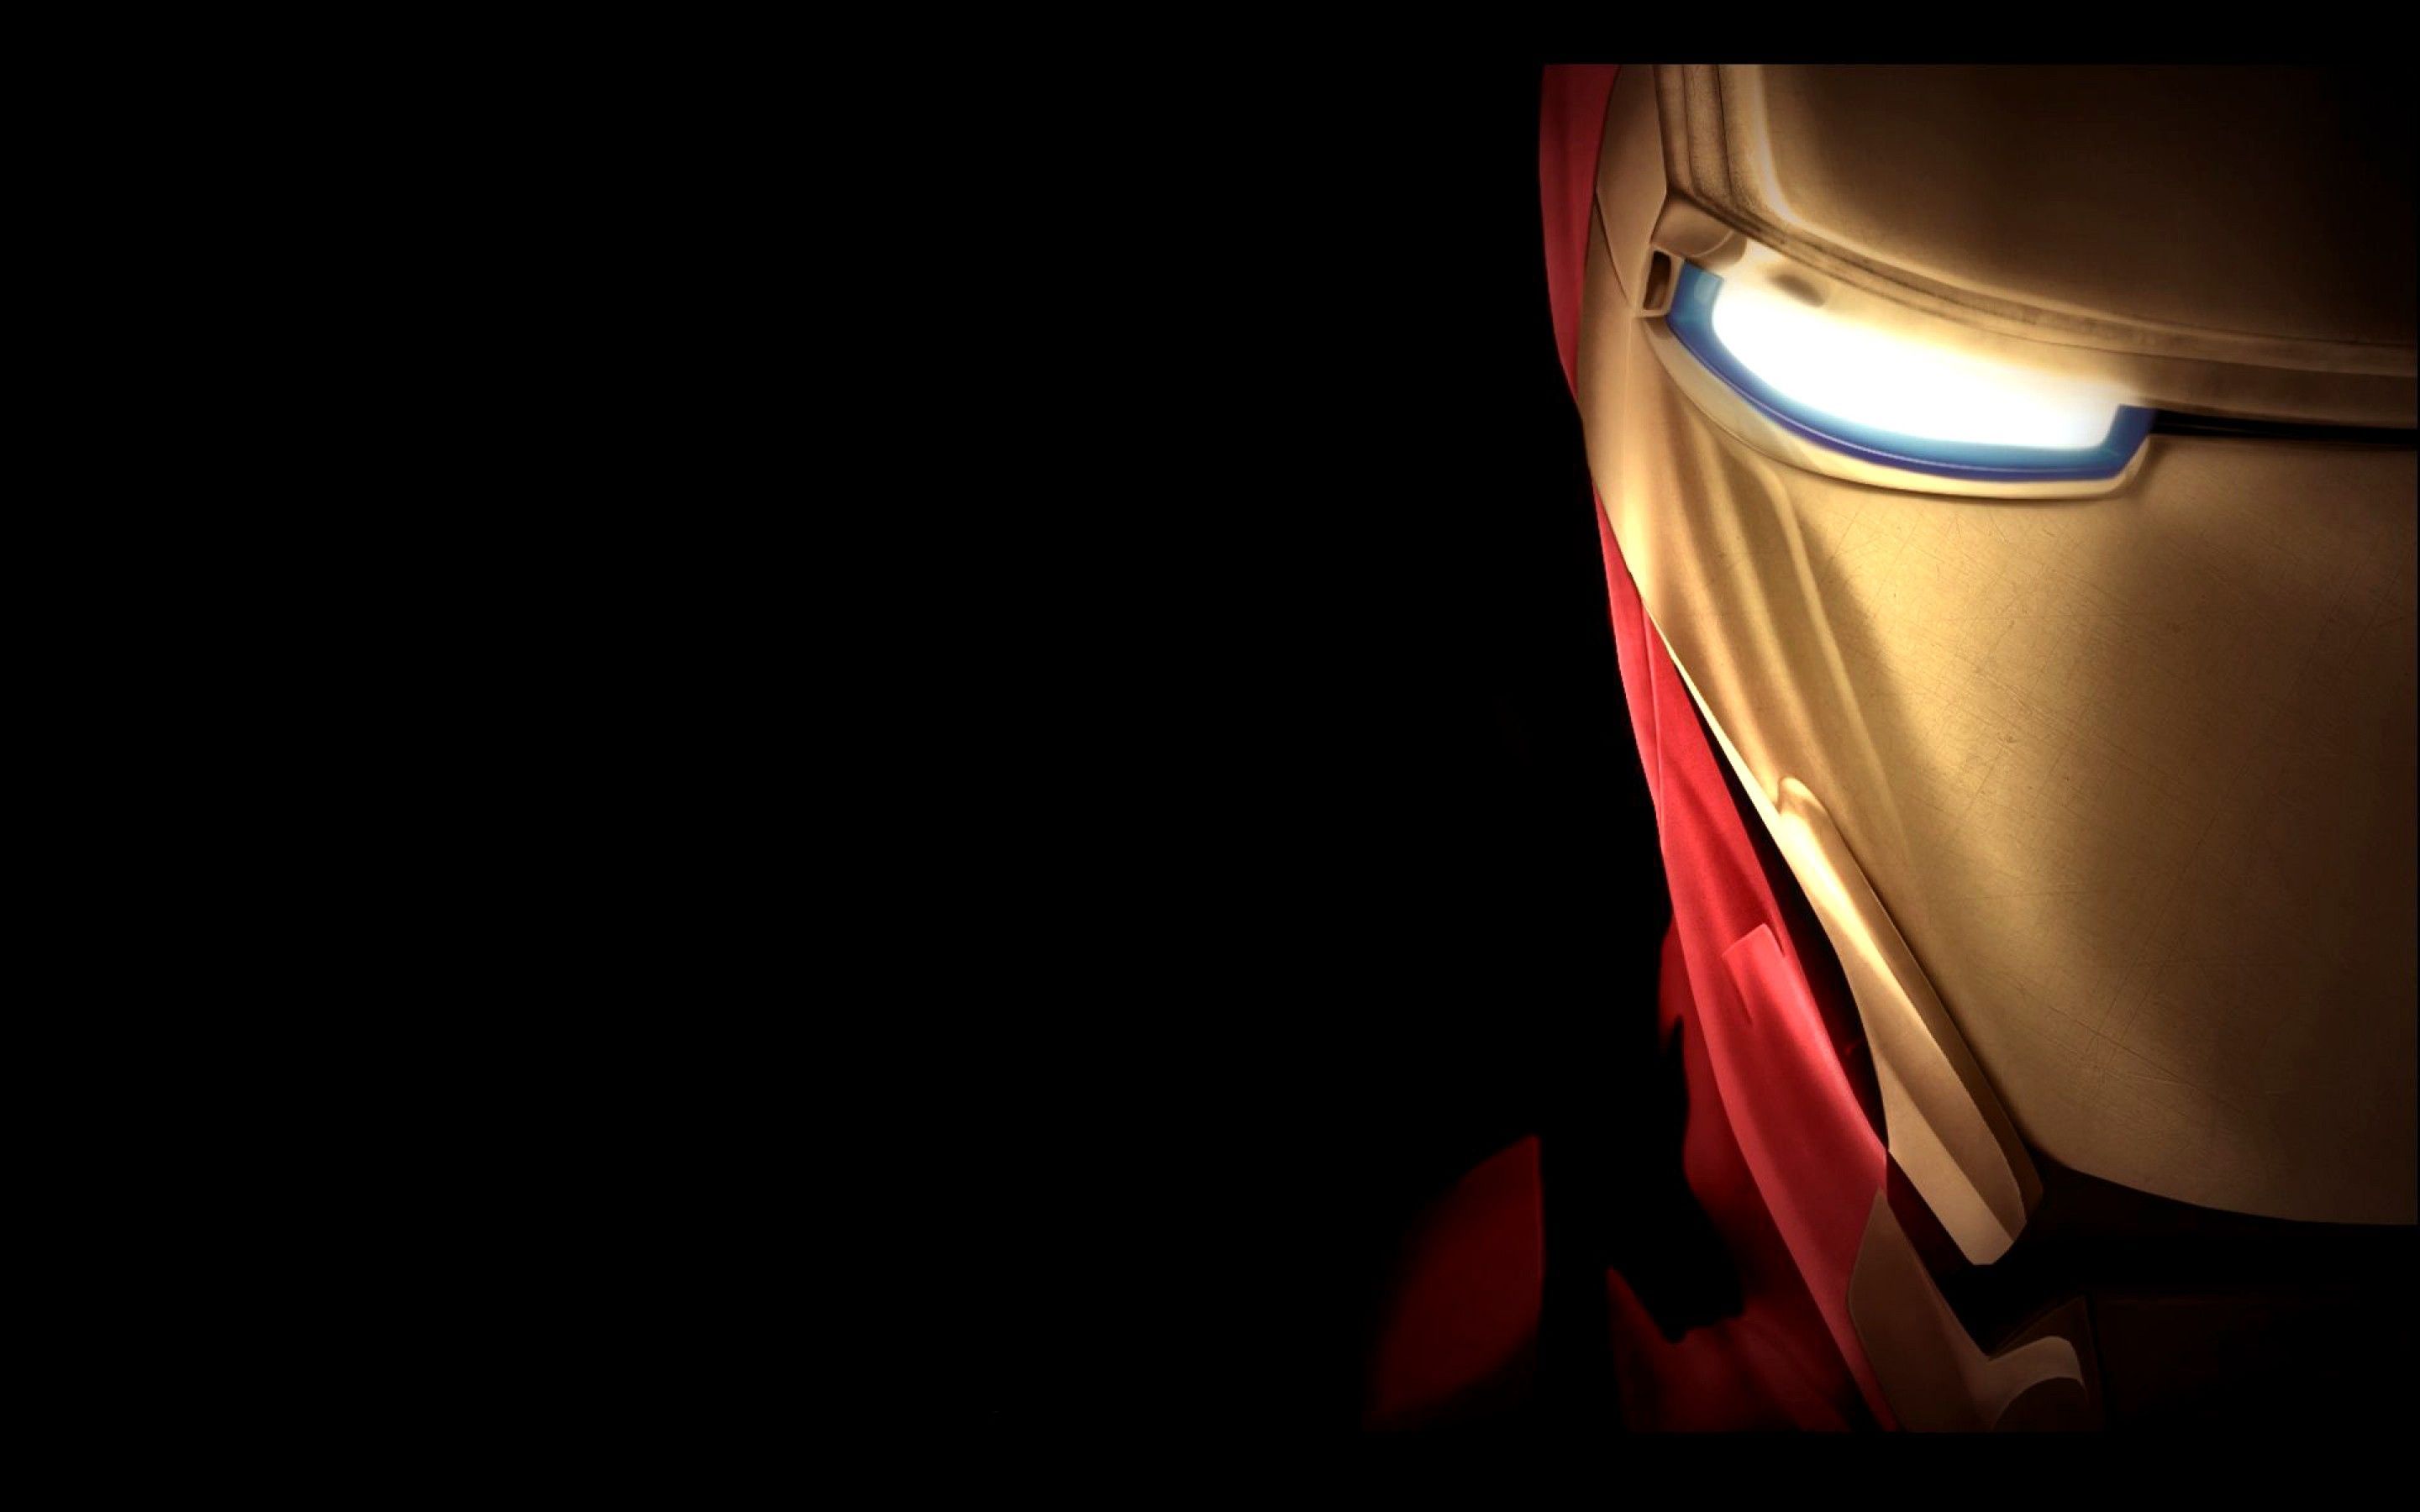 Cool Wallpaper with Iron Man Mask (Face Image) in Close Up and Dark Background Wallpaper. Wallpaper Download. High Resolution Wallpaper. Iron man wallpaper, Iron man mask, Iron man HD wallpaper